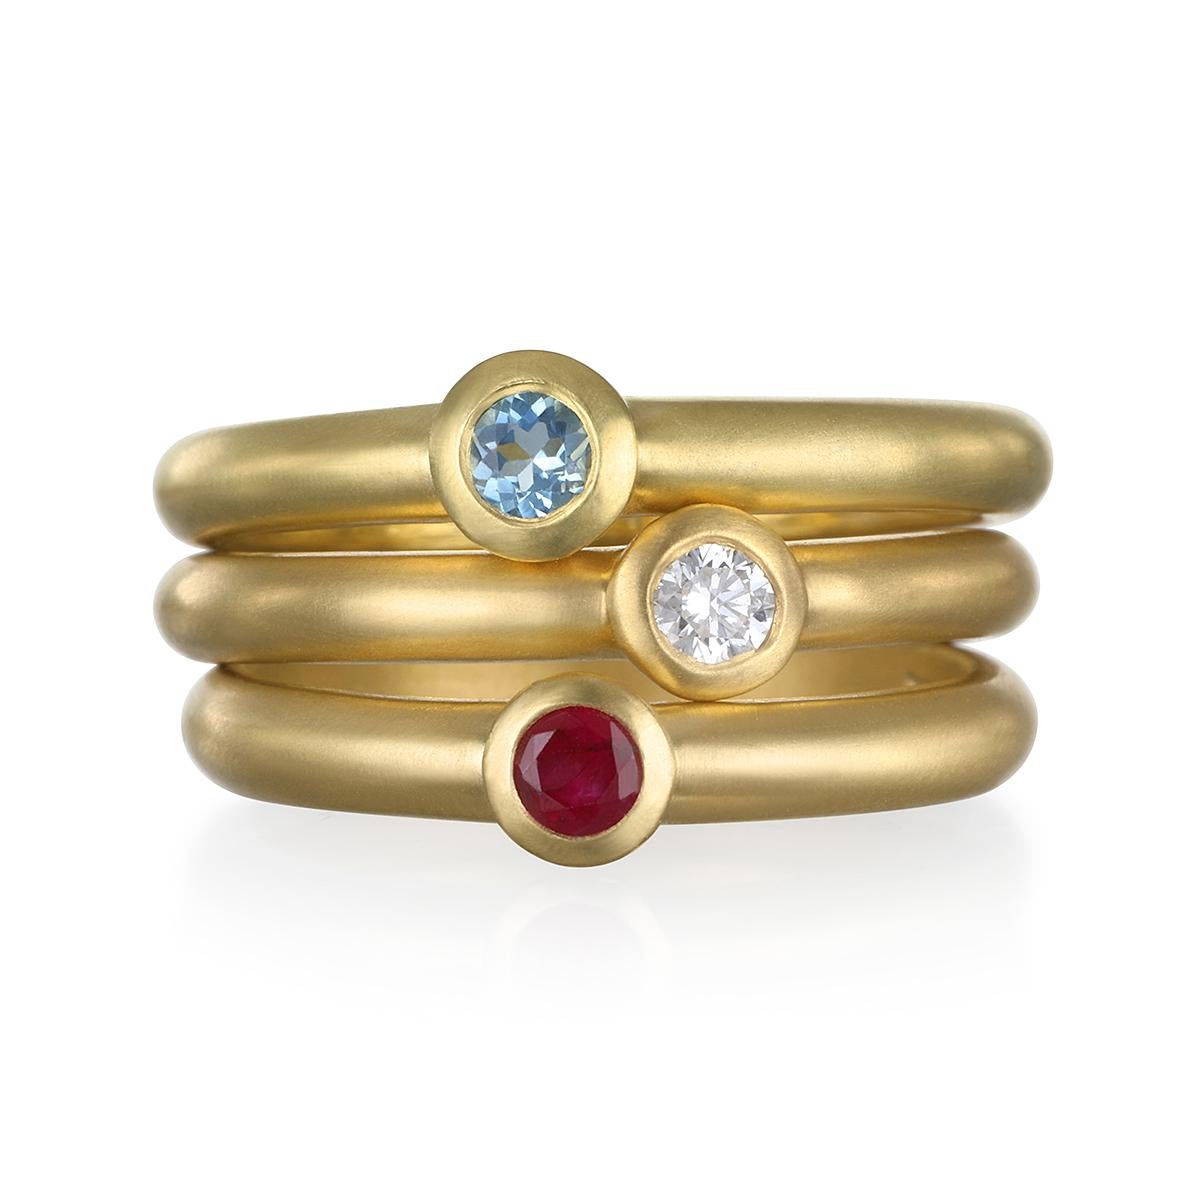 The perfect vibrant, simple ruby solitaire ring. Beautifully crafted, bezel set and matte-finished.  Wear alone or stacked with other rings to elevate your individual style!

Handcrafted in 18k green gold, Faye Kim’s modern design conveys